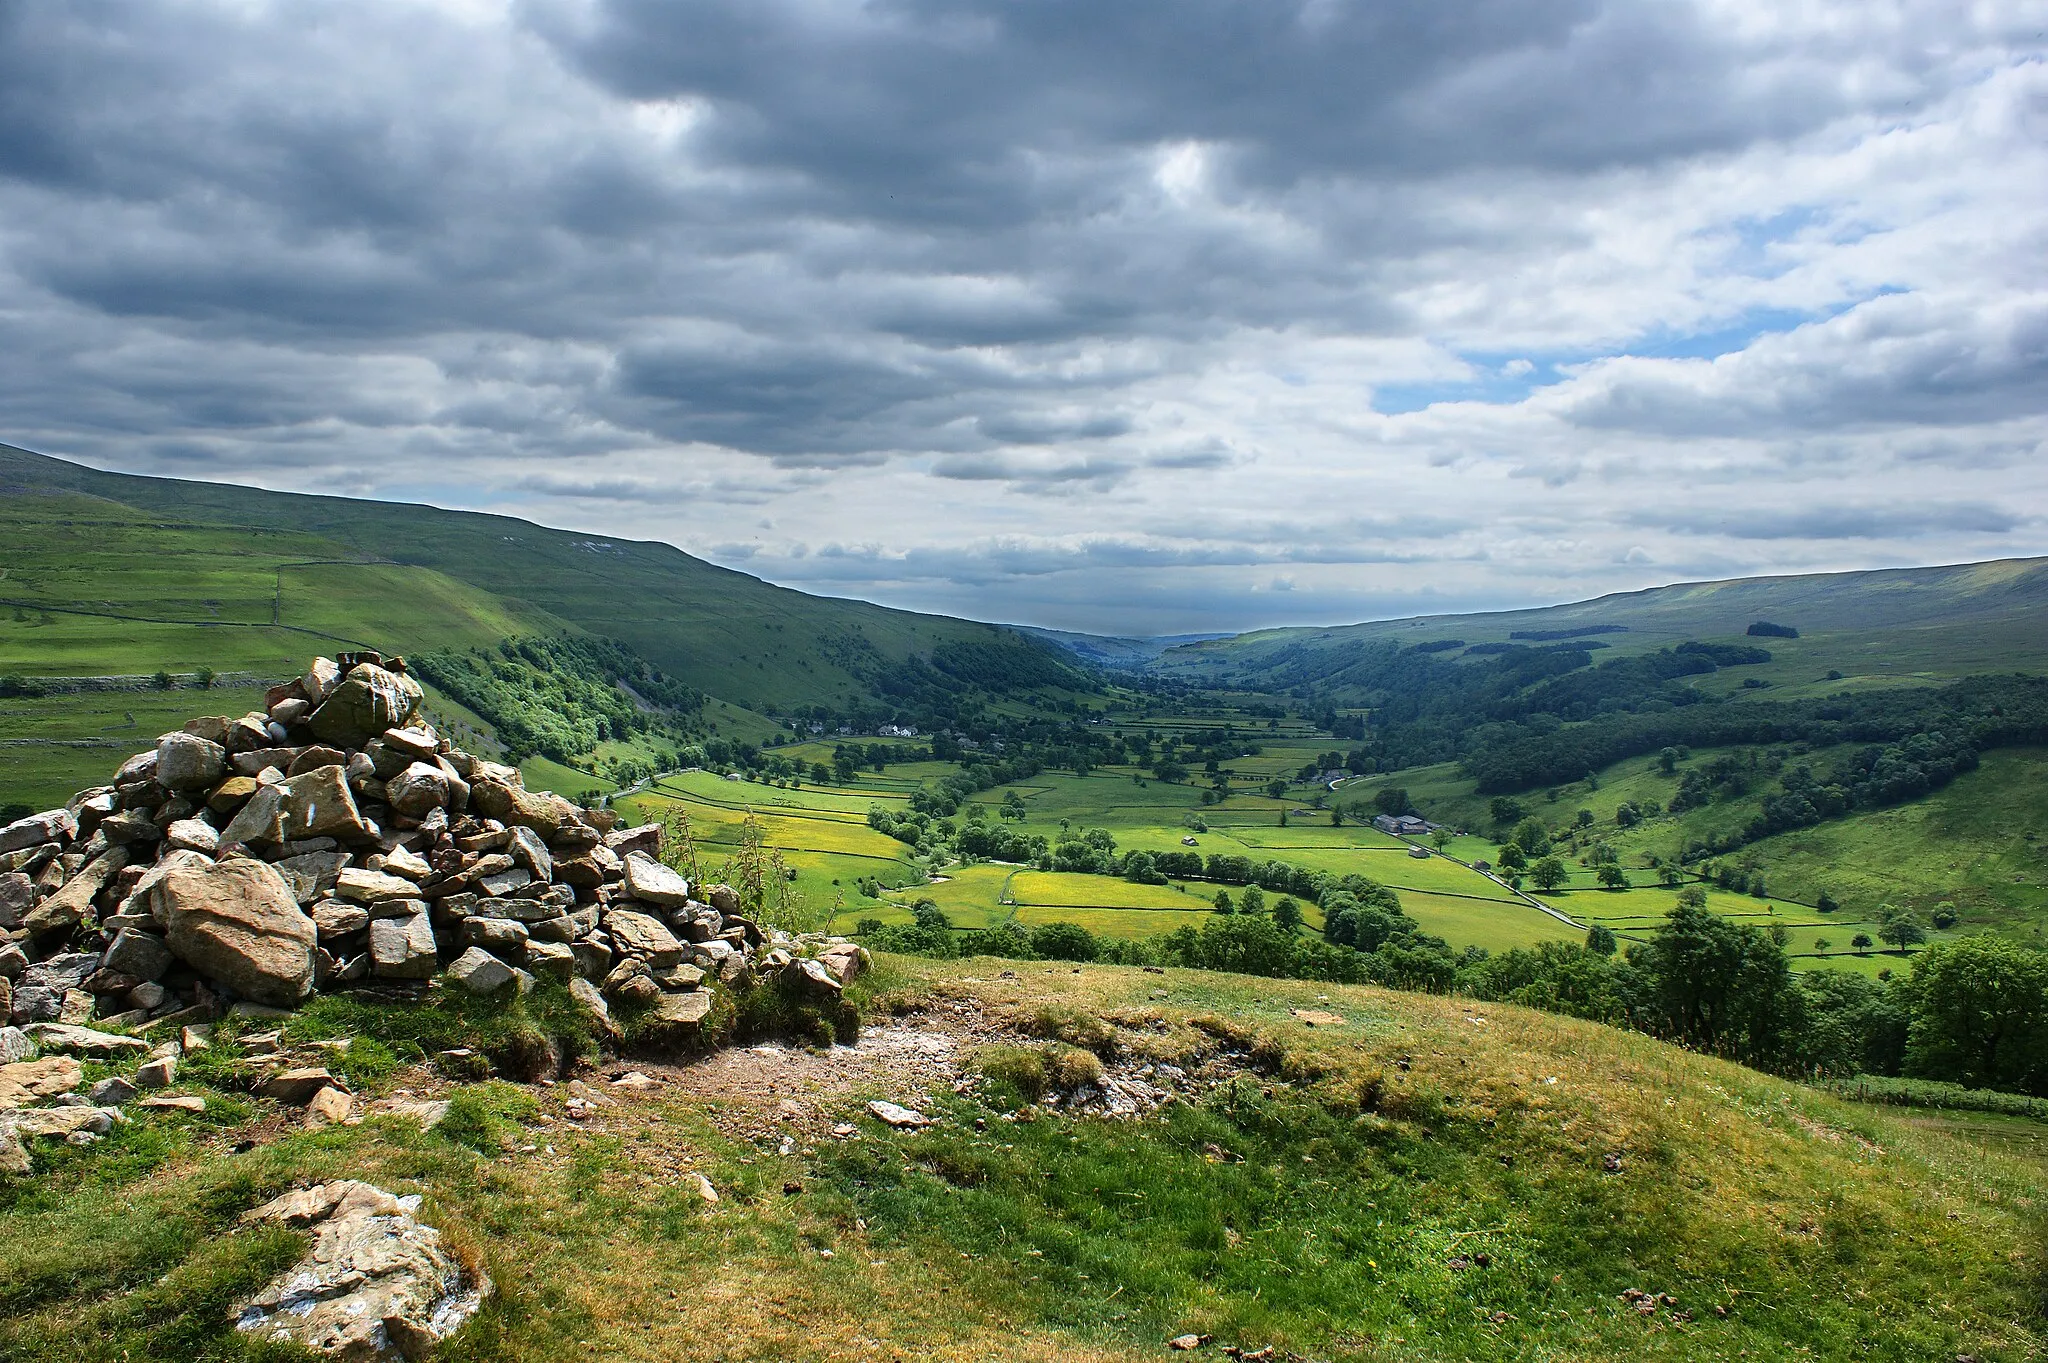 Photo showing: A cairn "offering one of the finest views in the Yorkshire Dales" - Looking South